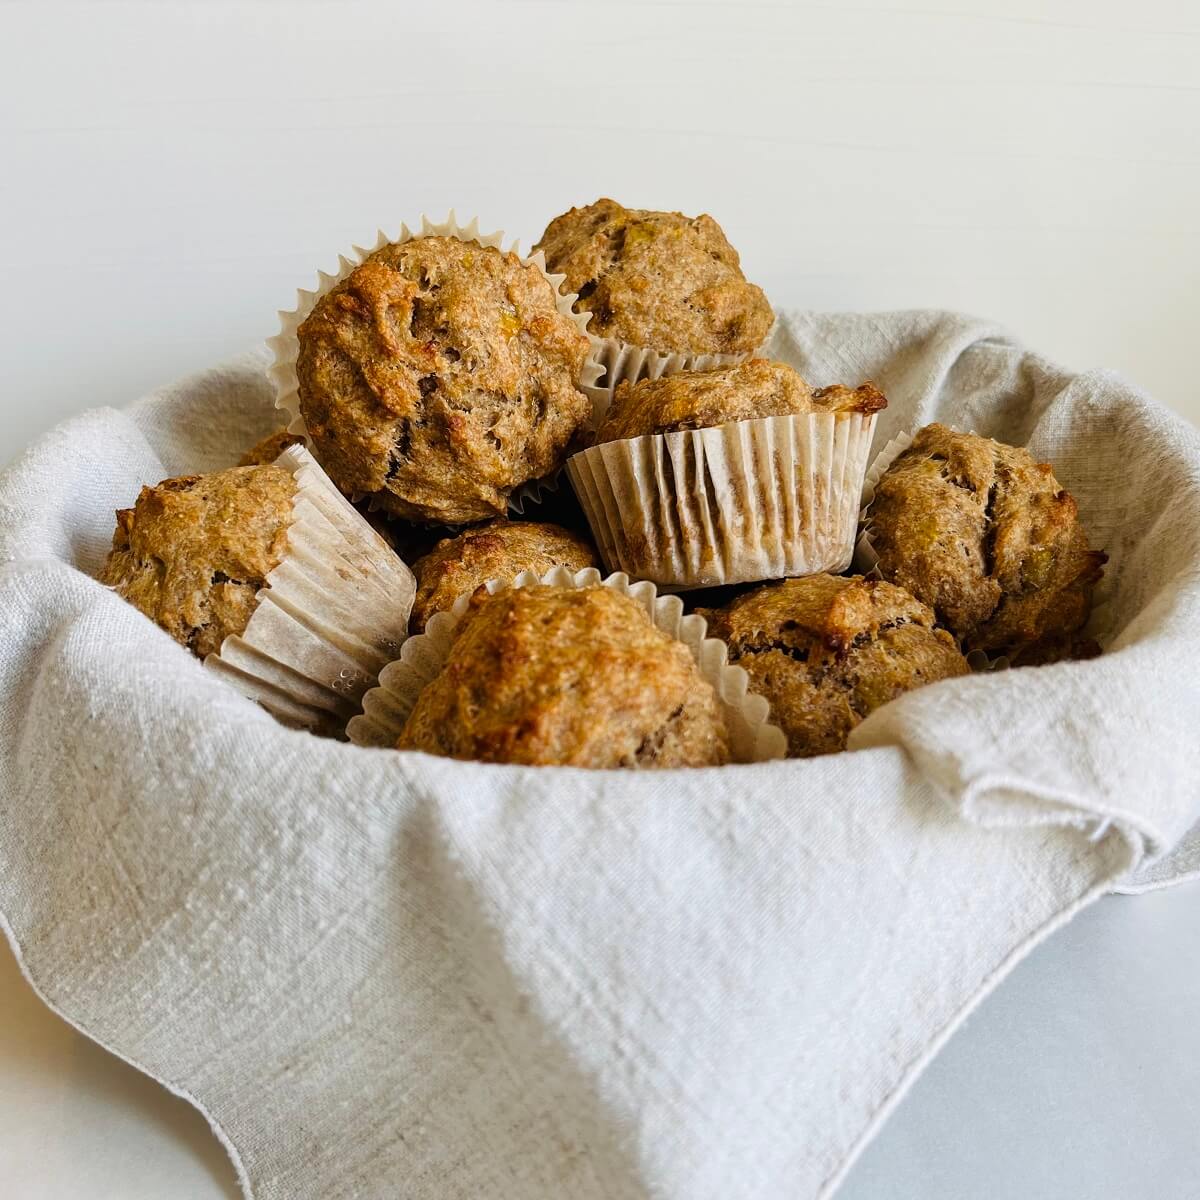 Whole wheat banana muffins piled in a basket lined with a linen napkin.